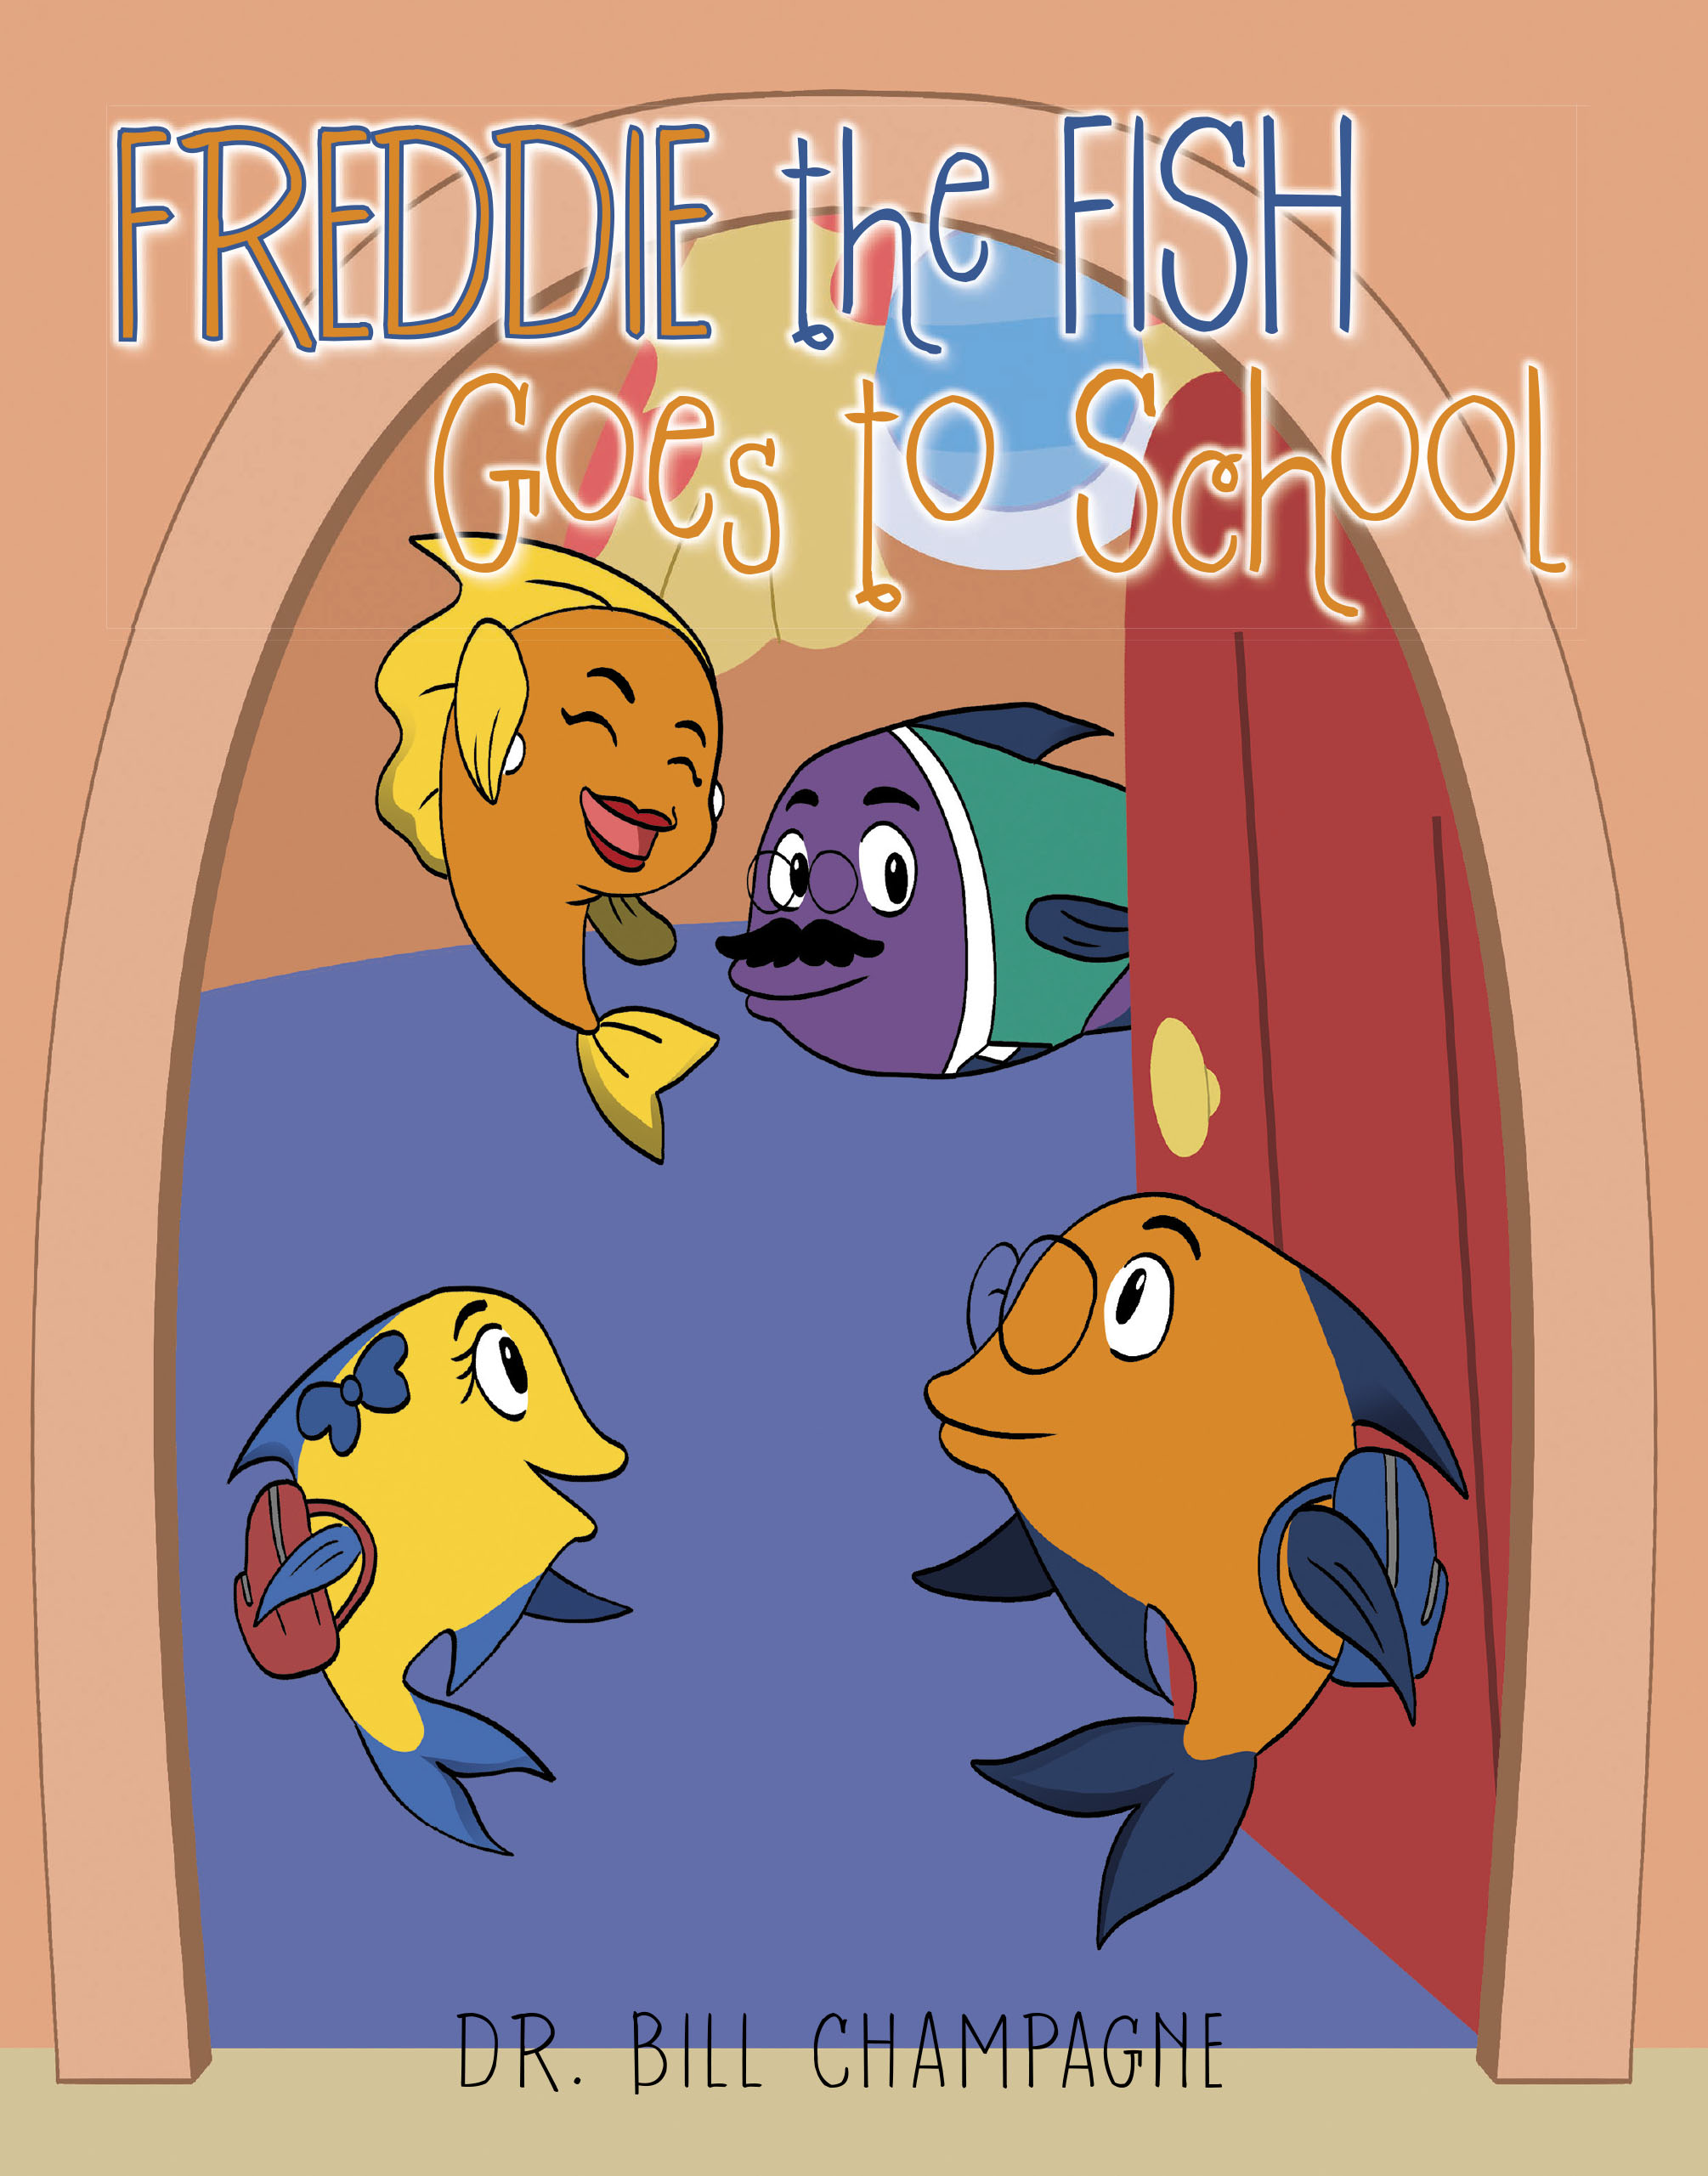 Dr. Bill Champagne’s New Book, "Freddie the Fish Goes to School," Follows Young Freddie and His Sister as They Avoid the Temptation to Skip School and Play with Friends